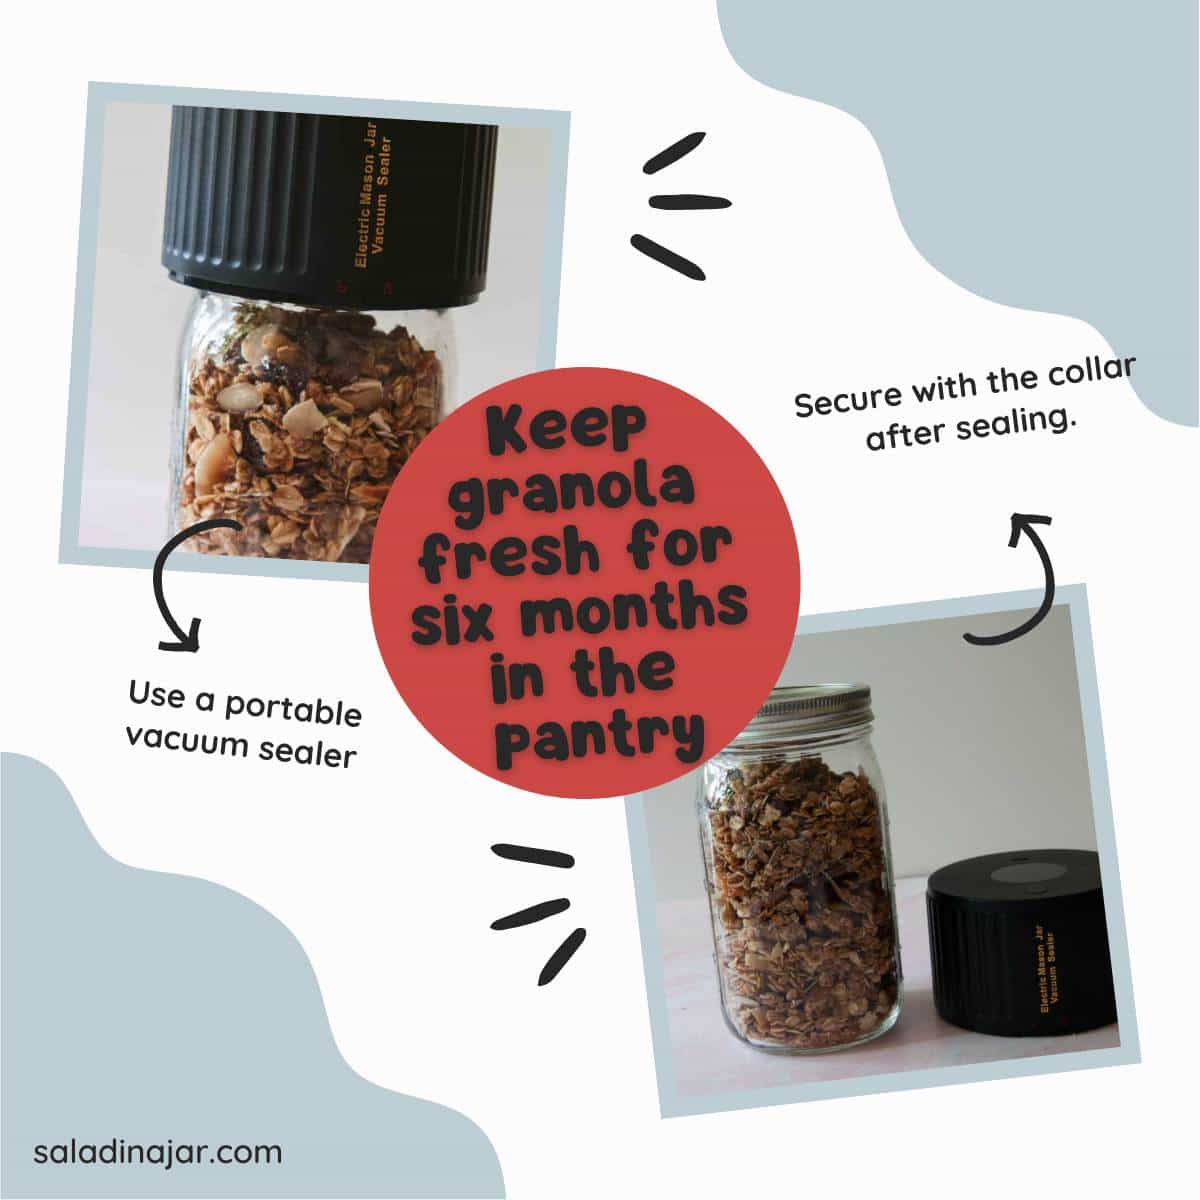 infographic to illustrate how to vacuum-seal low-calorie granola for prolonged freshness.